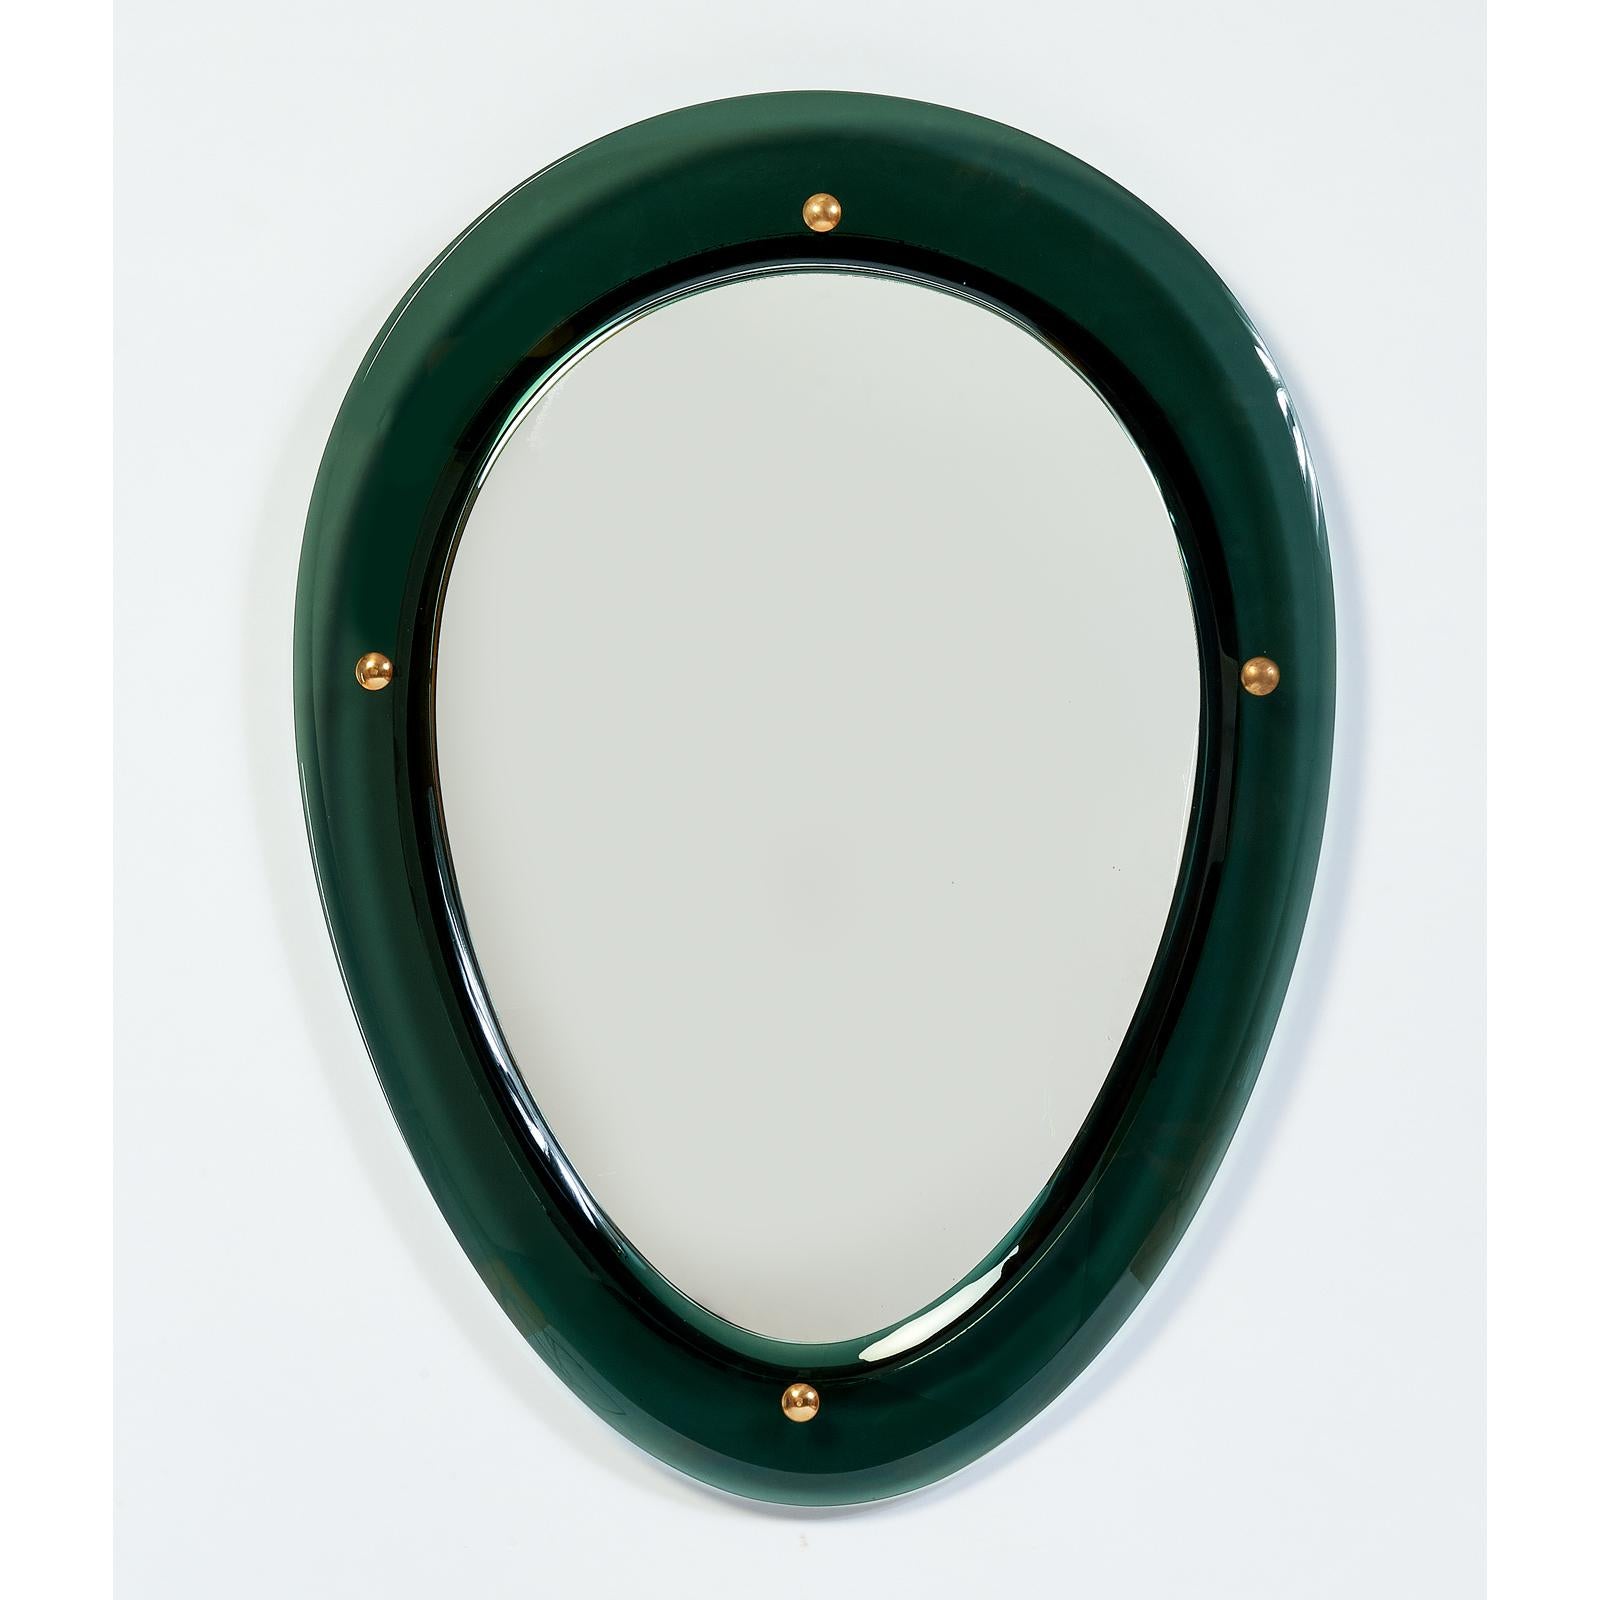 Italy, 1950s
Exquisite pair of oval shaped colored glass mirrors,
with beveled glass frames mounted on mirrored glass, 
with four brass mounts.
SOLD and PRICED INDIVIDUALLY
Dimensions: 25 W x 33 H x 1 D
On one of the two mirrors corrosion of